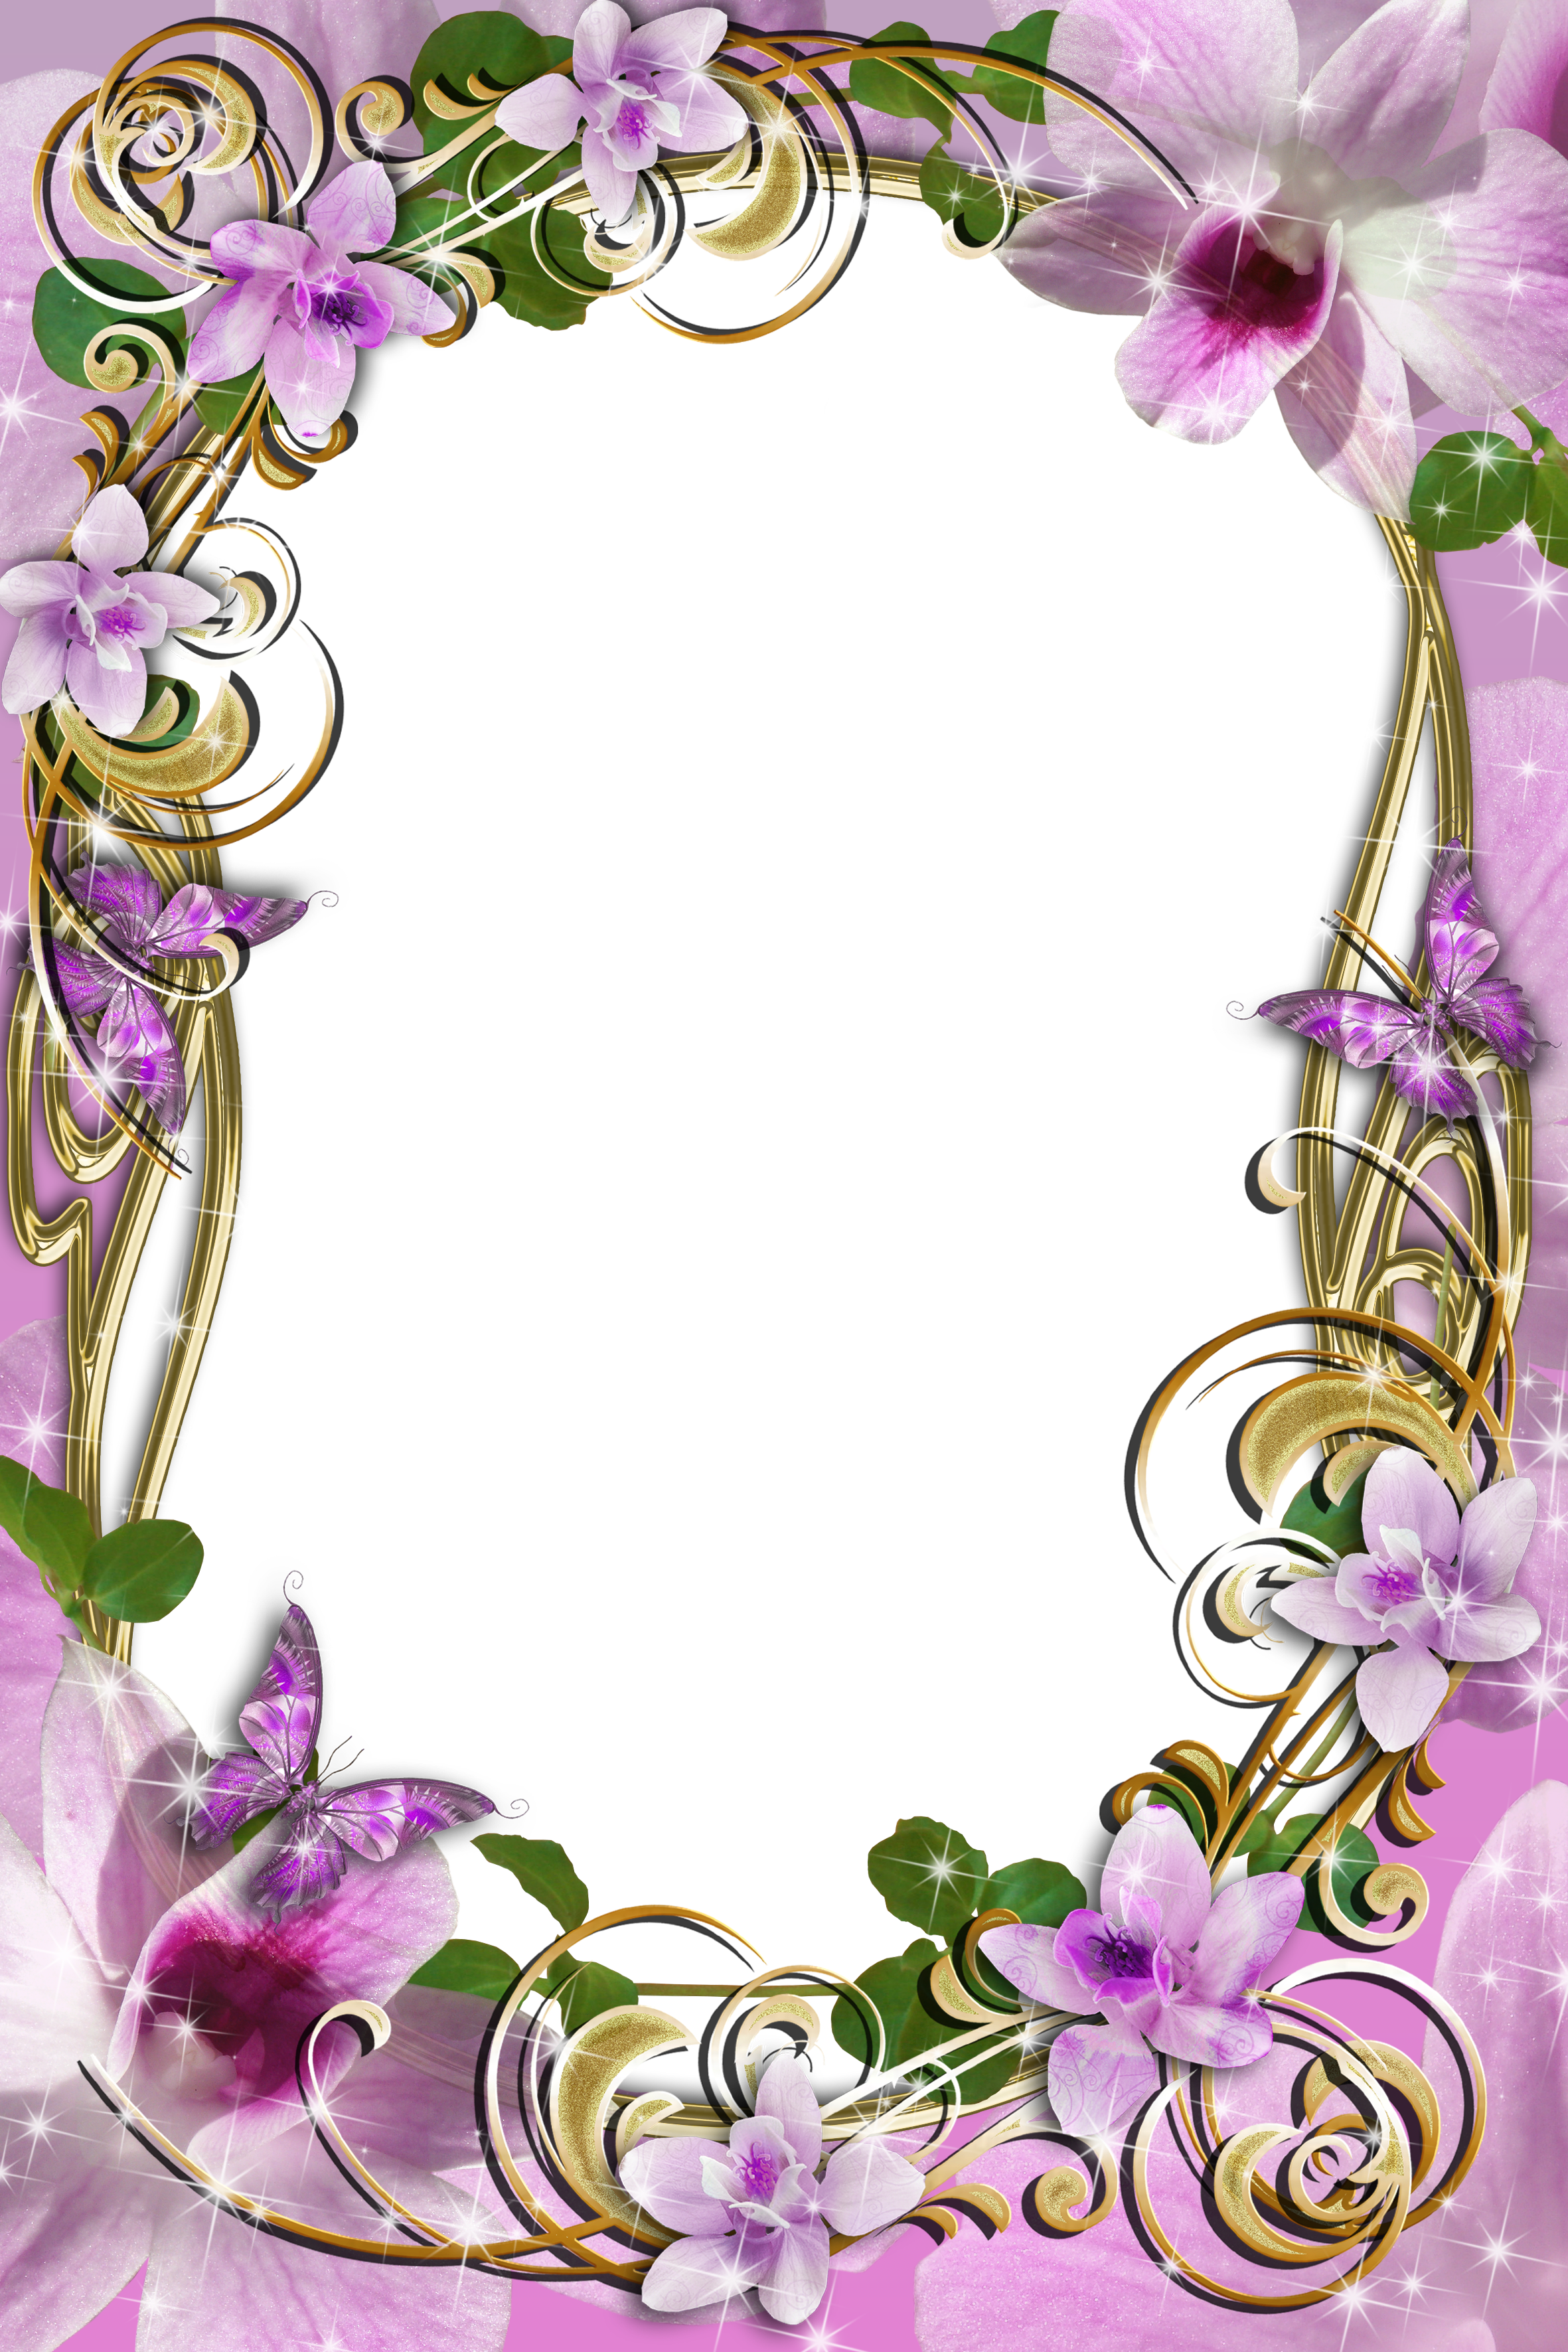 Transparent_Delicate_Frame_with_Flowers.png?m=1420972111 